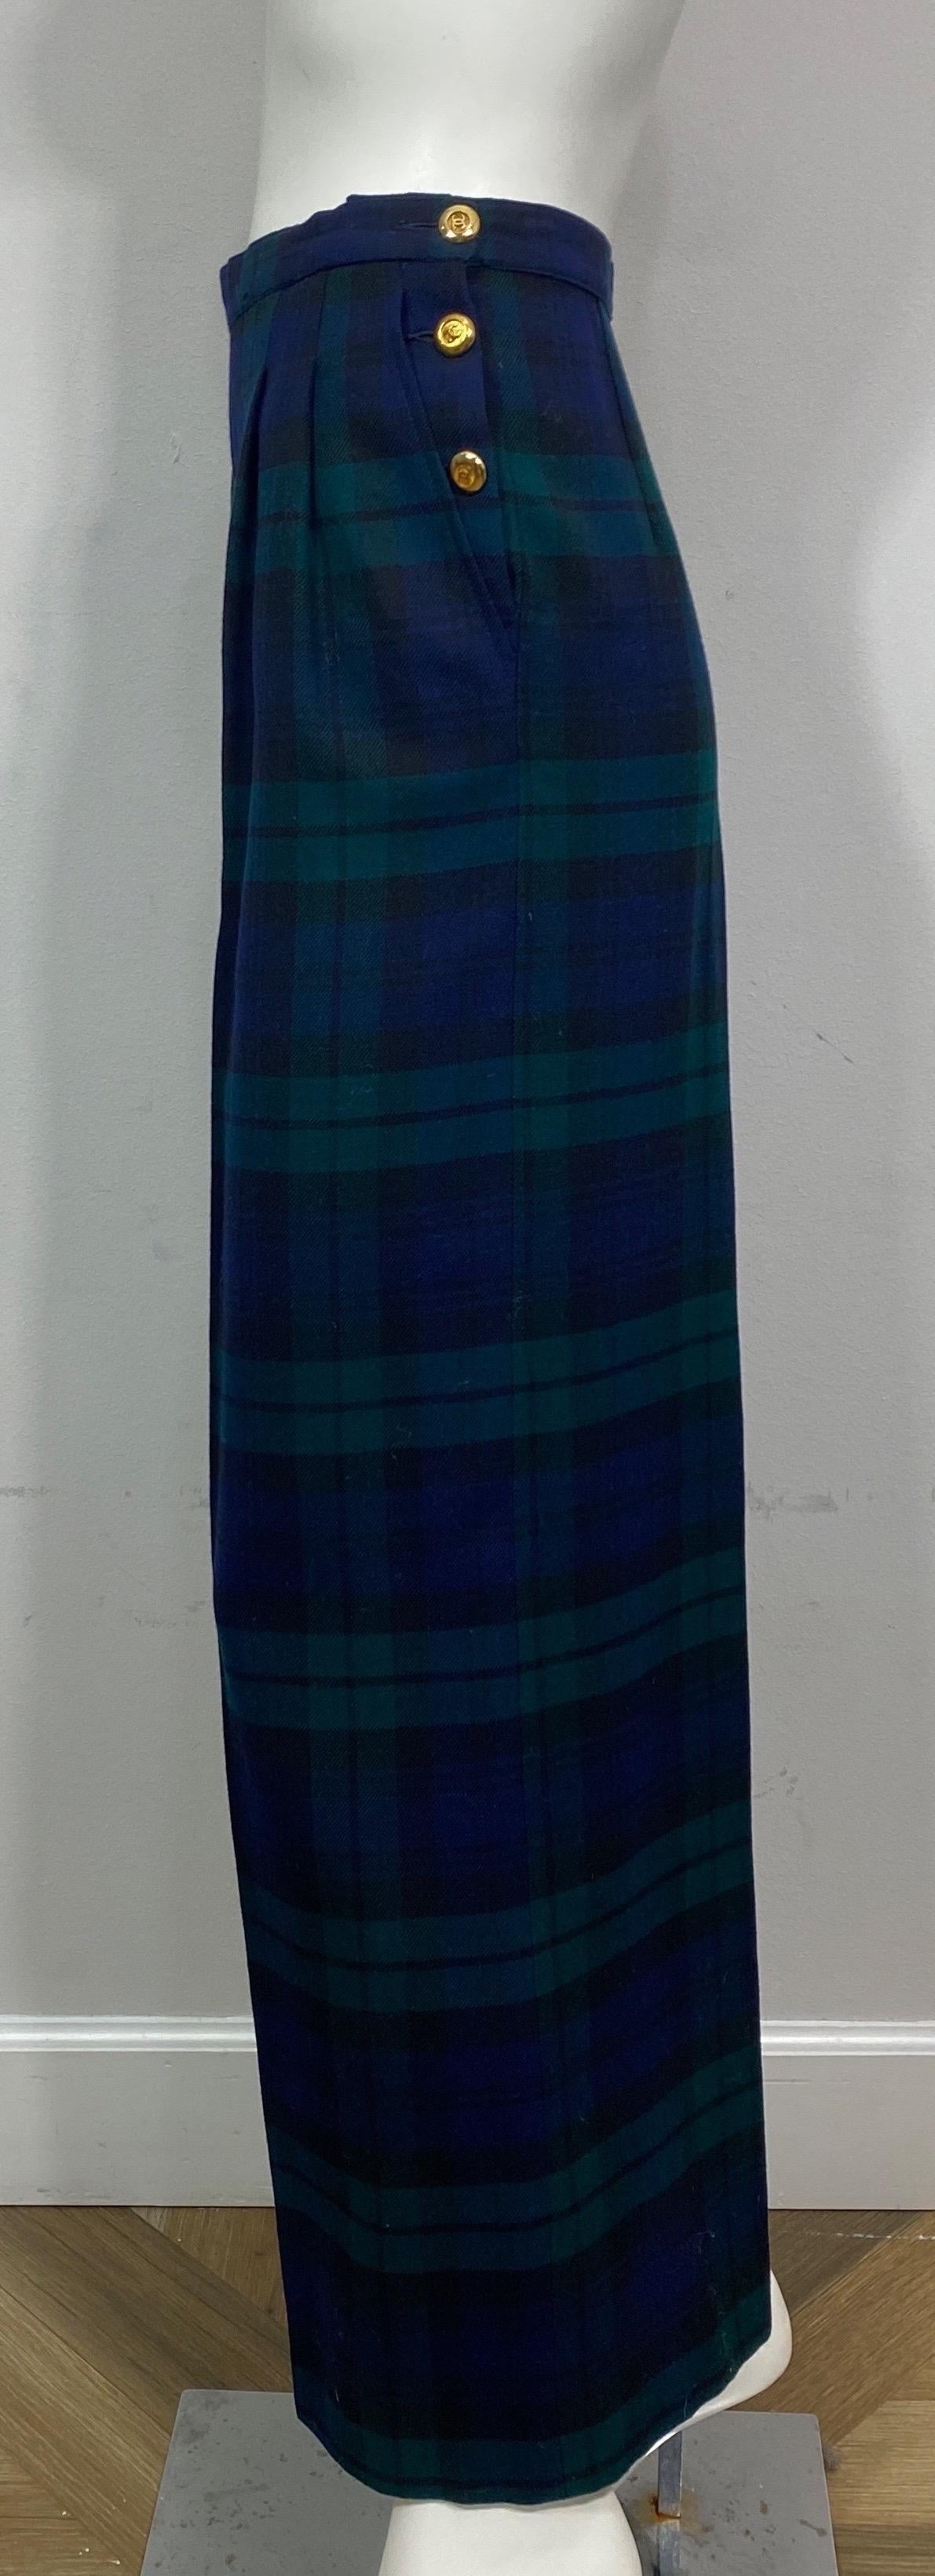 Chanel Mid 1980’s Navy and Green Plaid Double Pleated Wool Pants-Size 36 For Sale 3